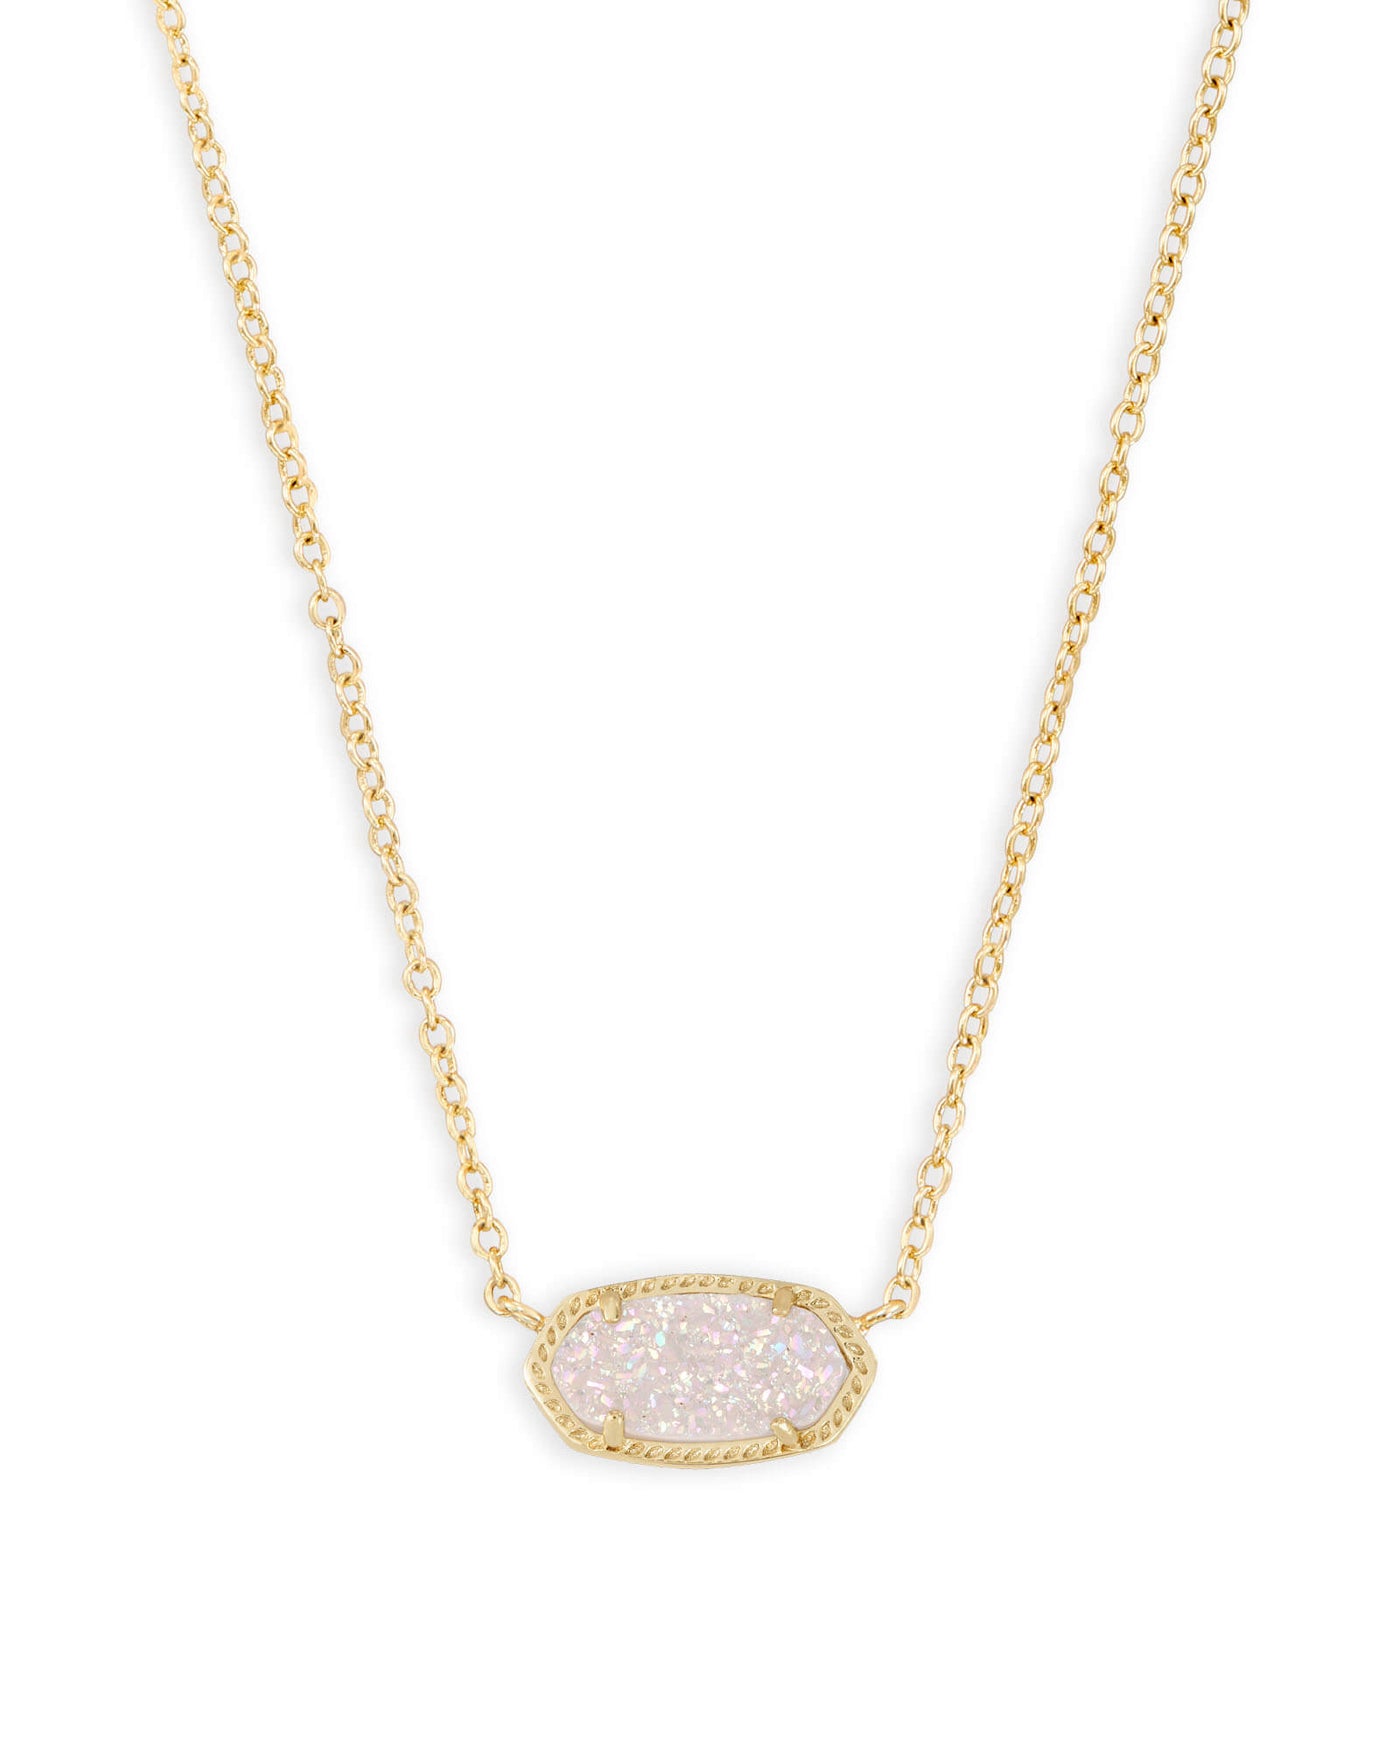 Kendra Scott Elisa Gold Pendant Necklace in Iridescent Drusy-Necklaces-Kendra Scott-Market Street Nest, Fashionable Clothing, Shoes and Home Décor Located in Mabank, TX